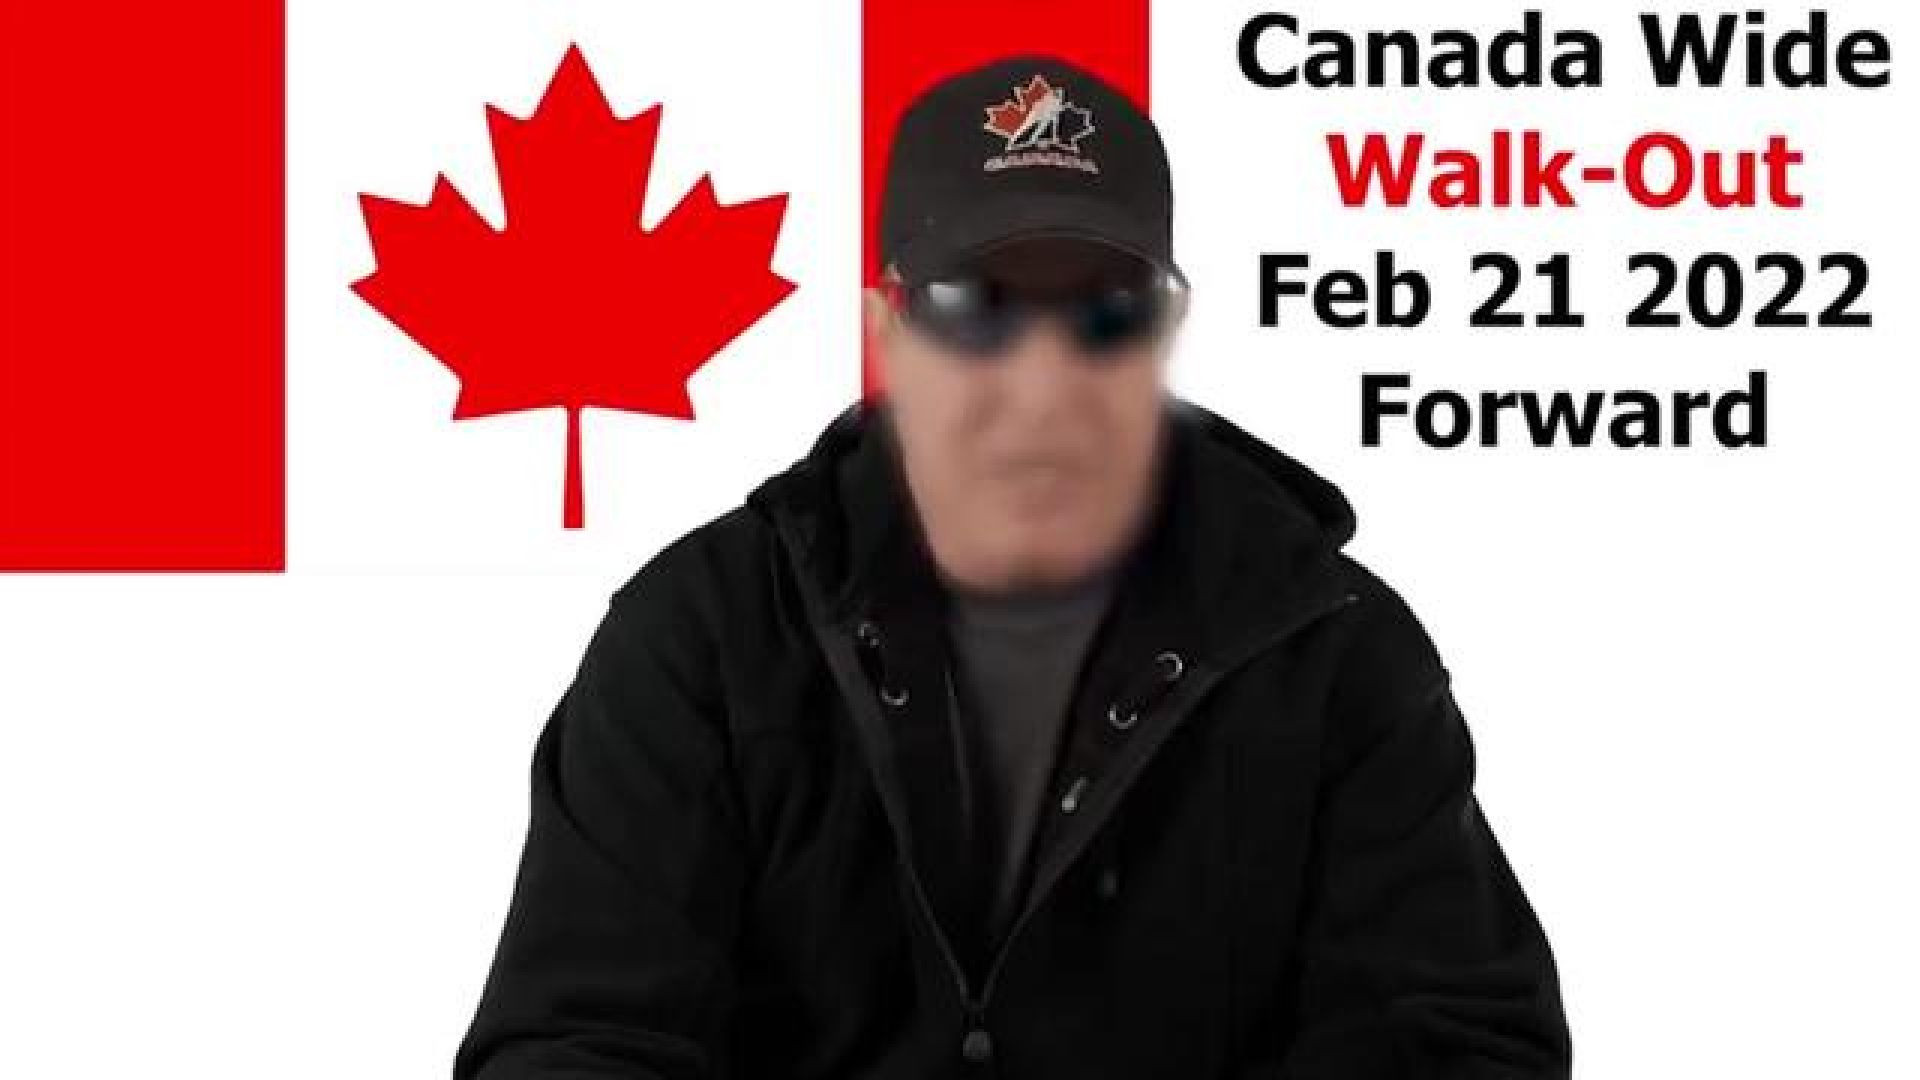 ⁣URGENT MESSAGE TO ALL CANADIANS NATIONWIDE WALKOUT BEGINS FEB 21ST